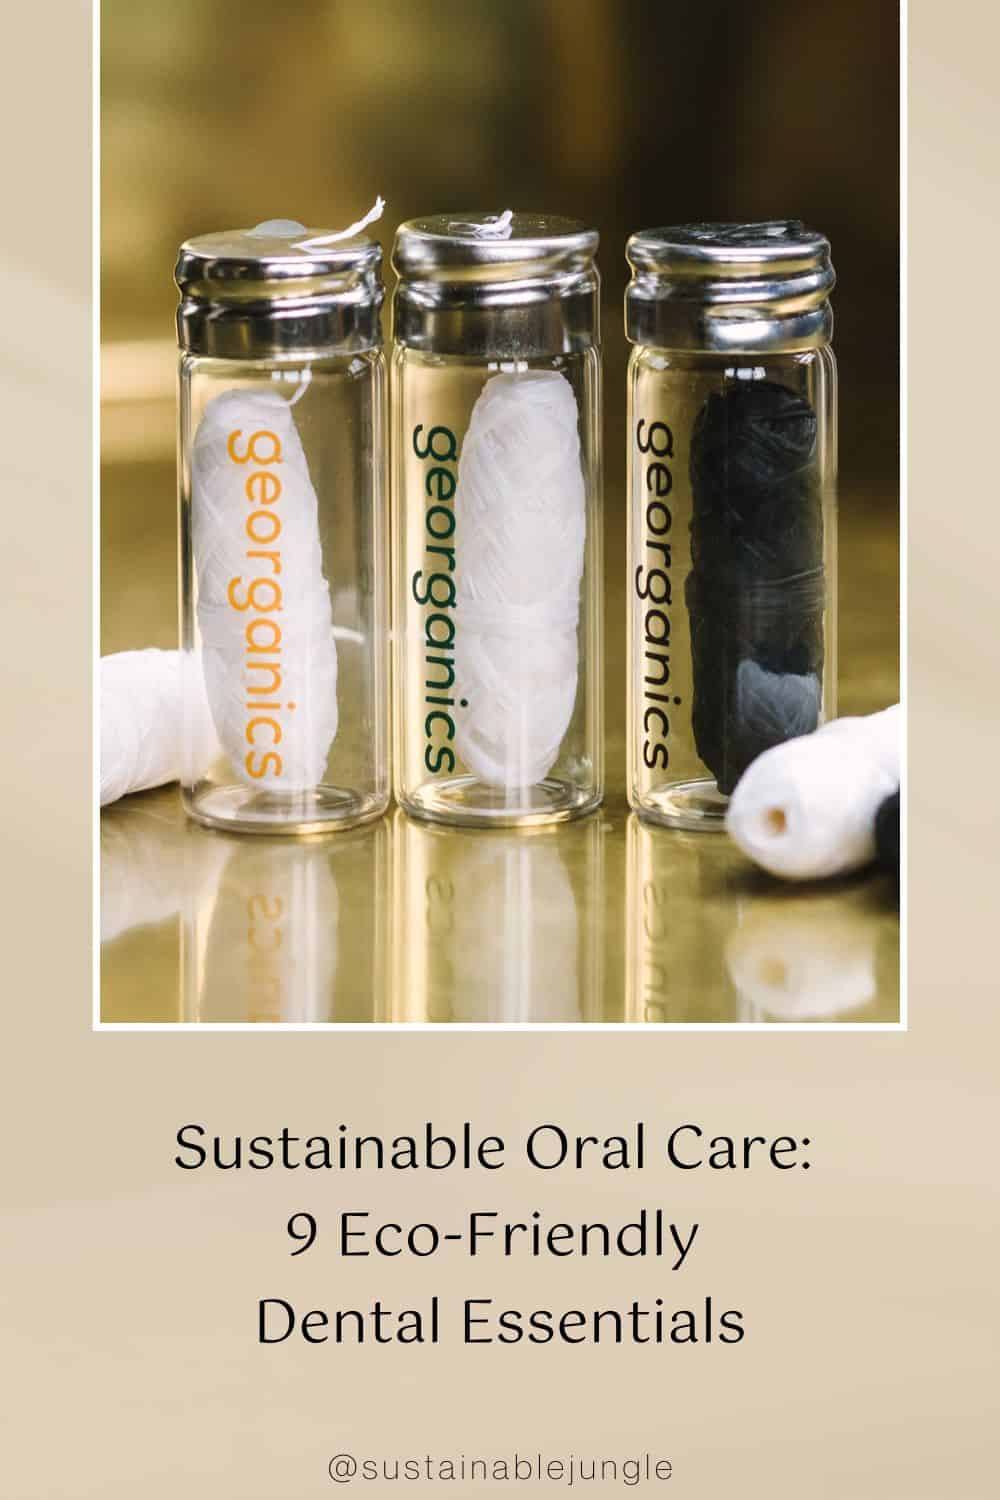 Sustainable Oral Care: 9 Eco-Friendly Dental Essentials Image by Georganics #sustainableoralcare #sustainableoralcareproducts #sustainabledentalcare #ecofriendlyoralcare #ecofriendlydentalcare #sustainablejungle